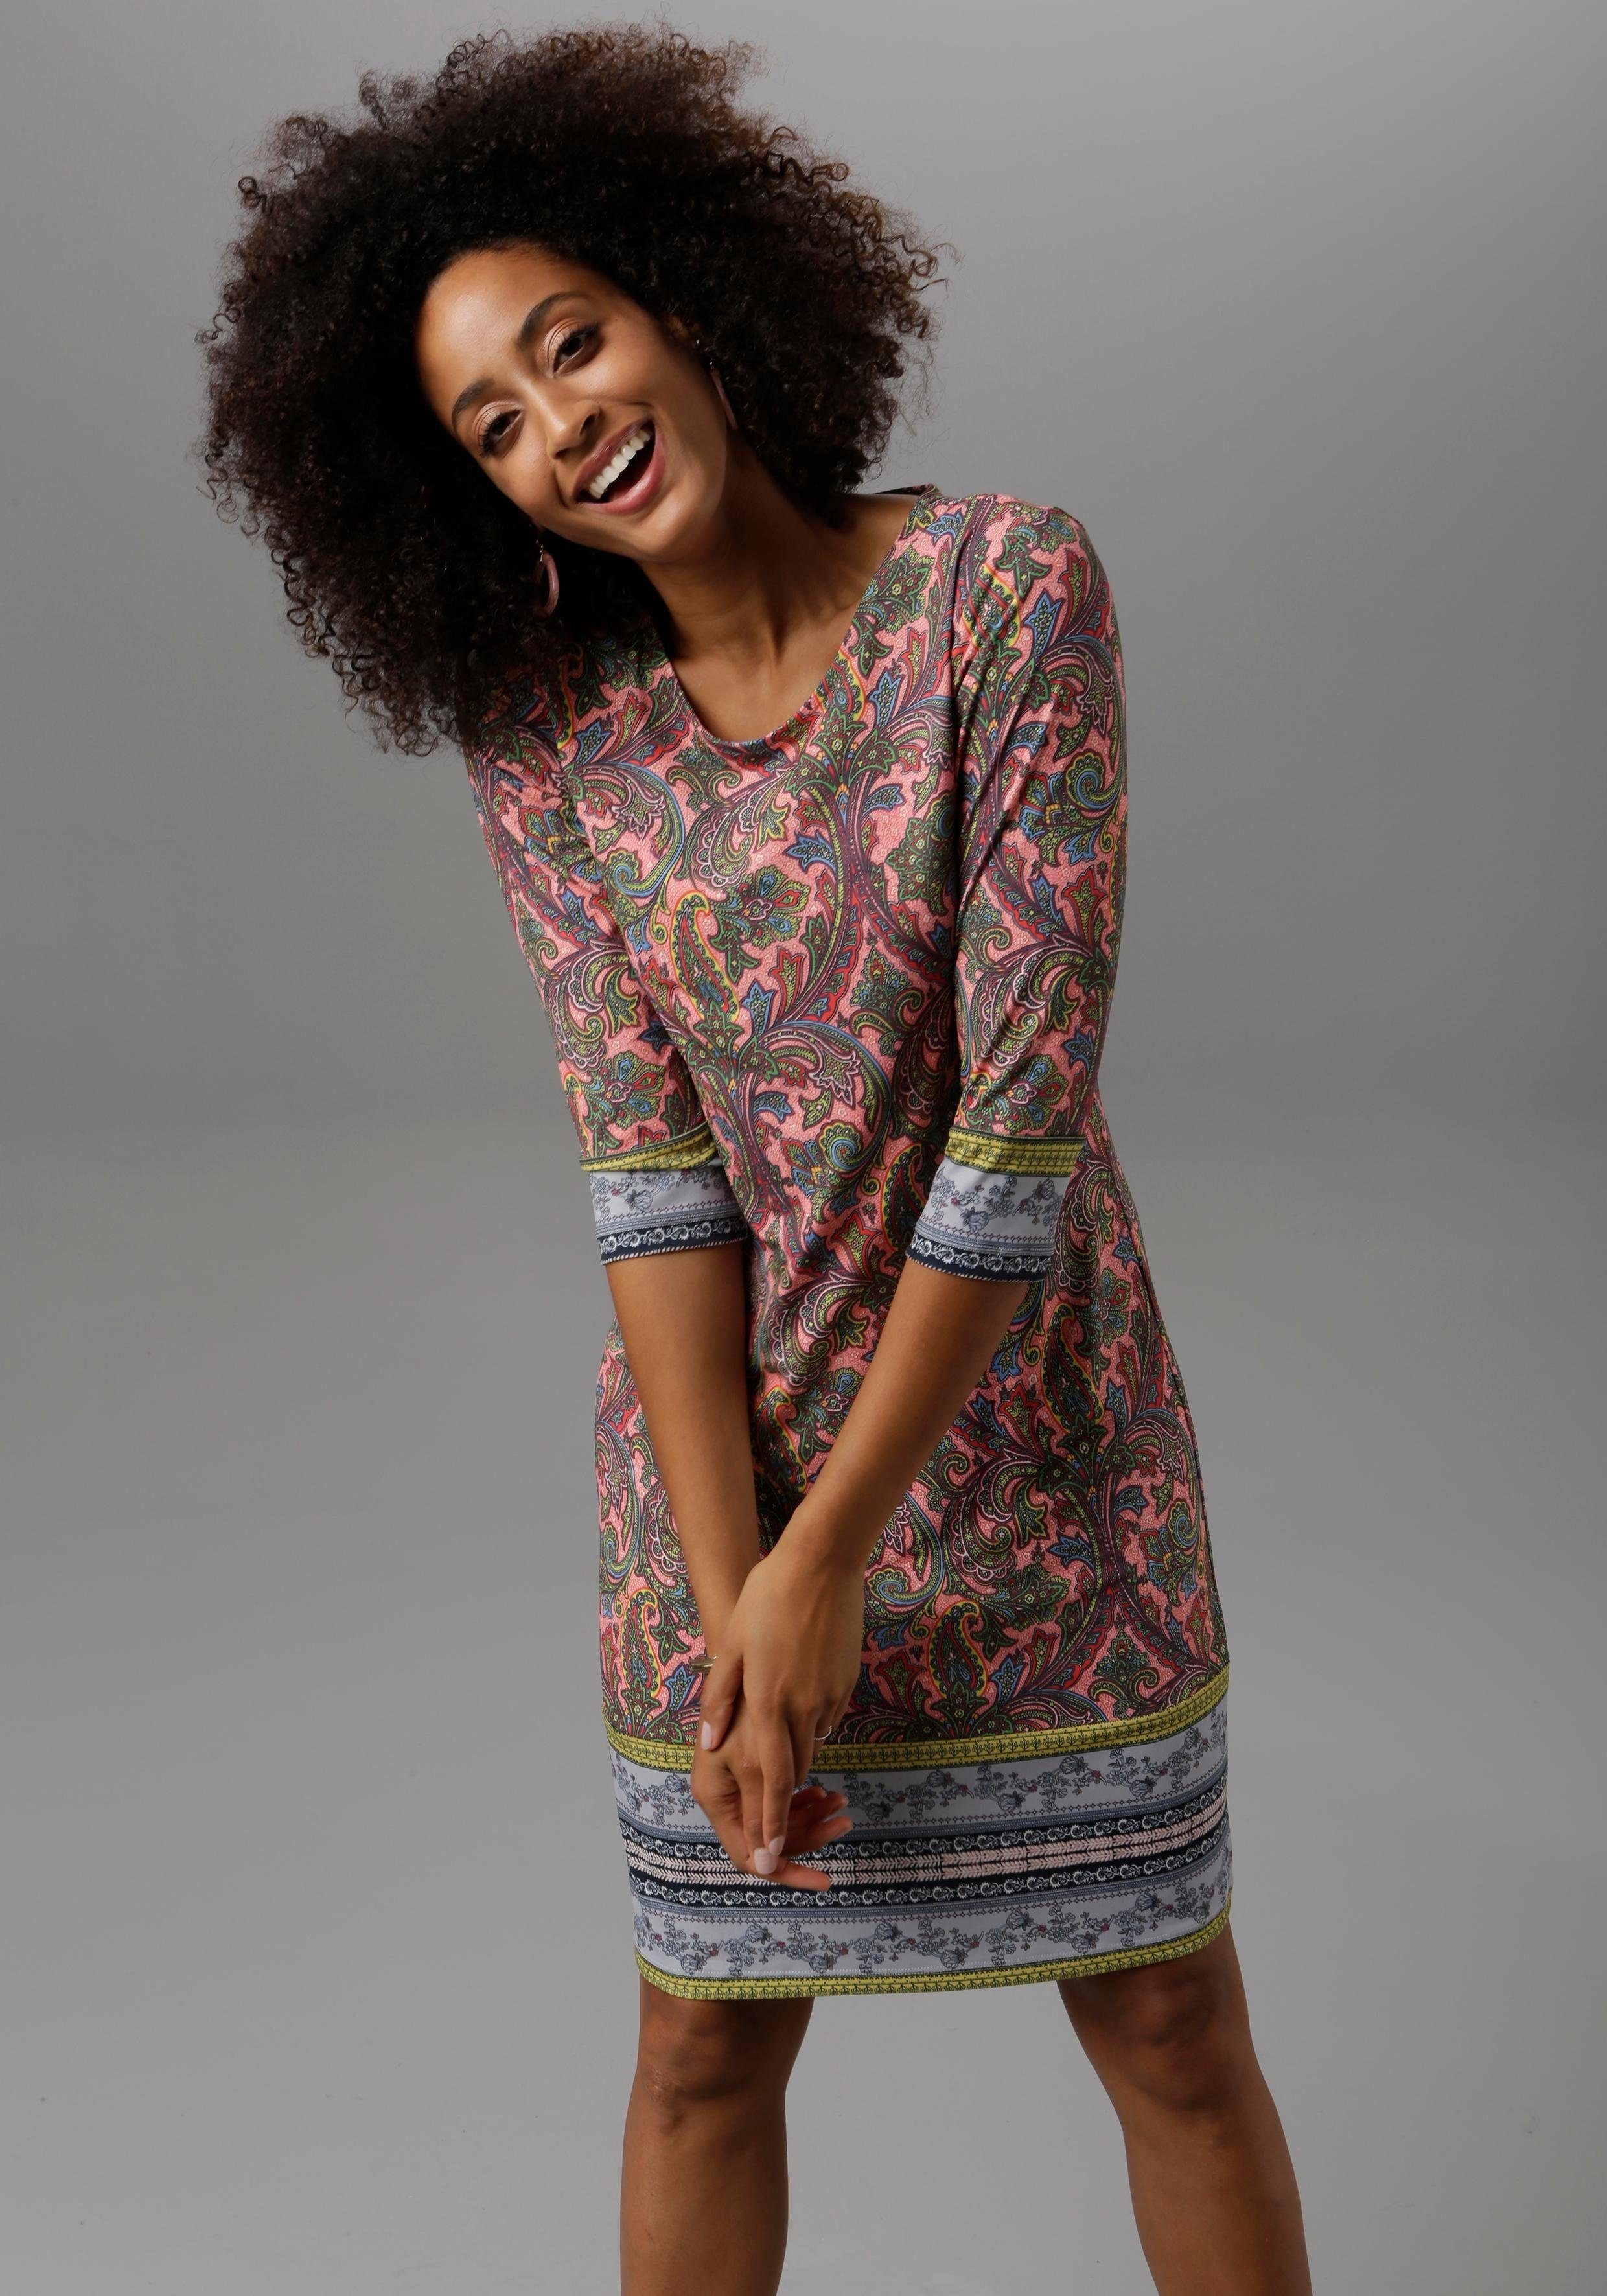 Muster farbenfrohem Jerseykleid SELECTED Aniston mit